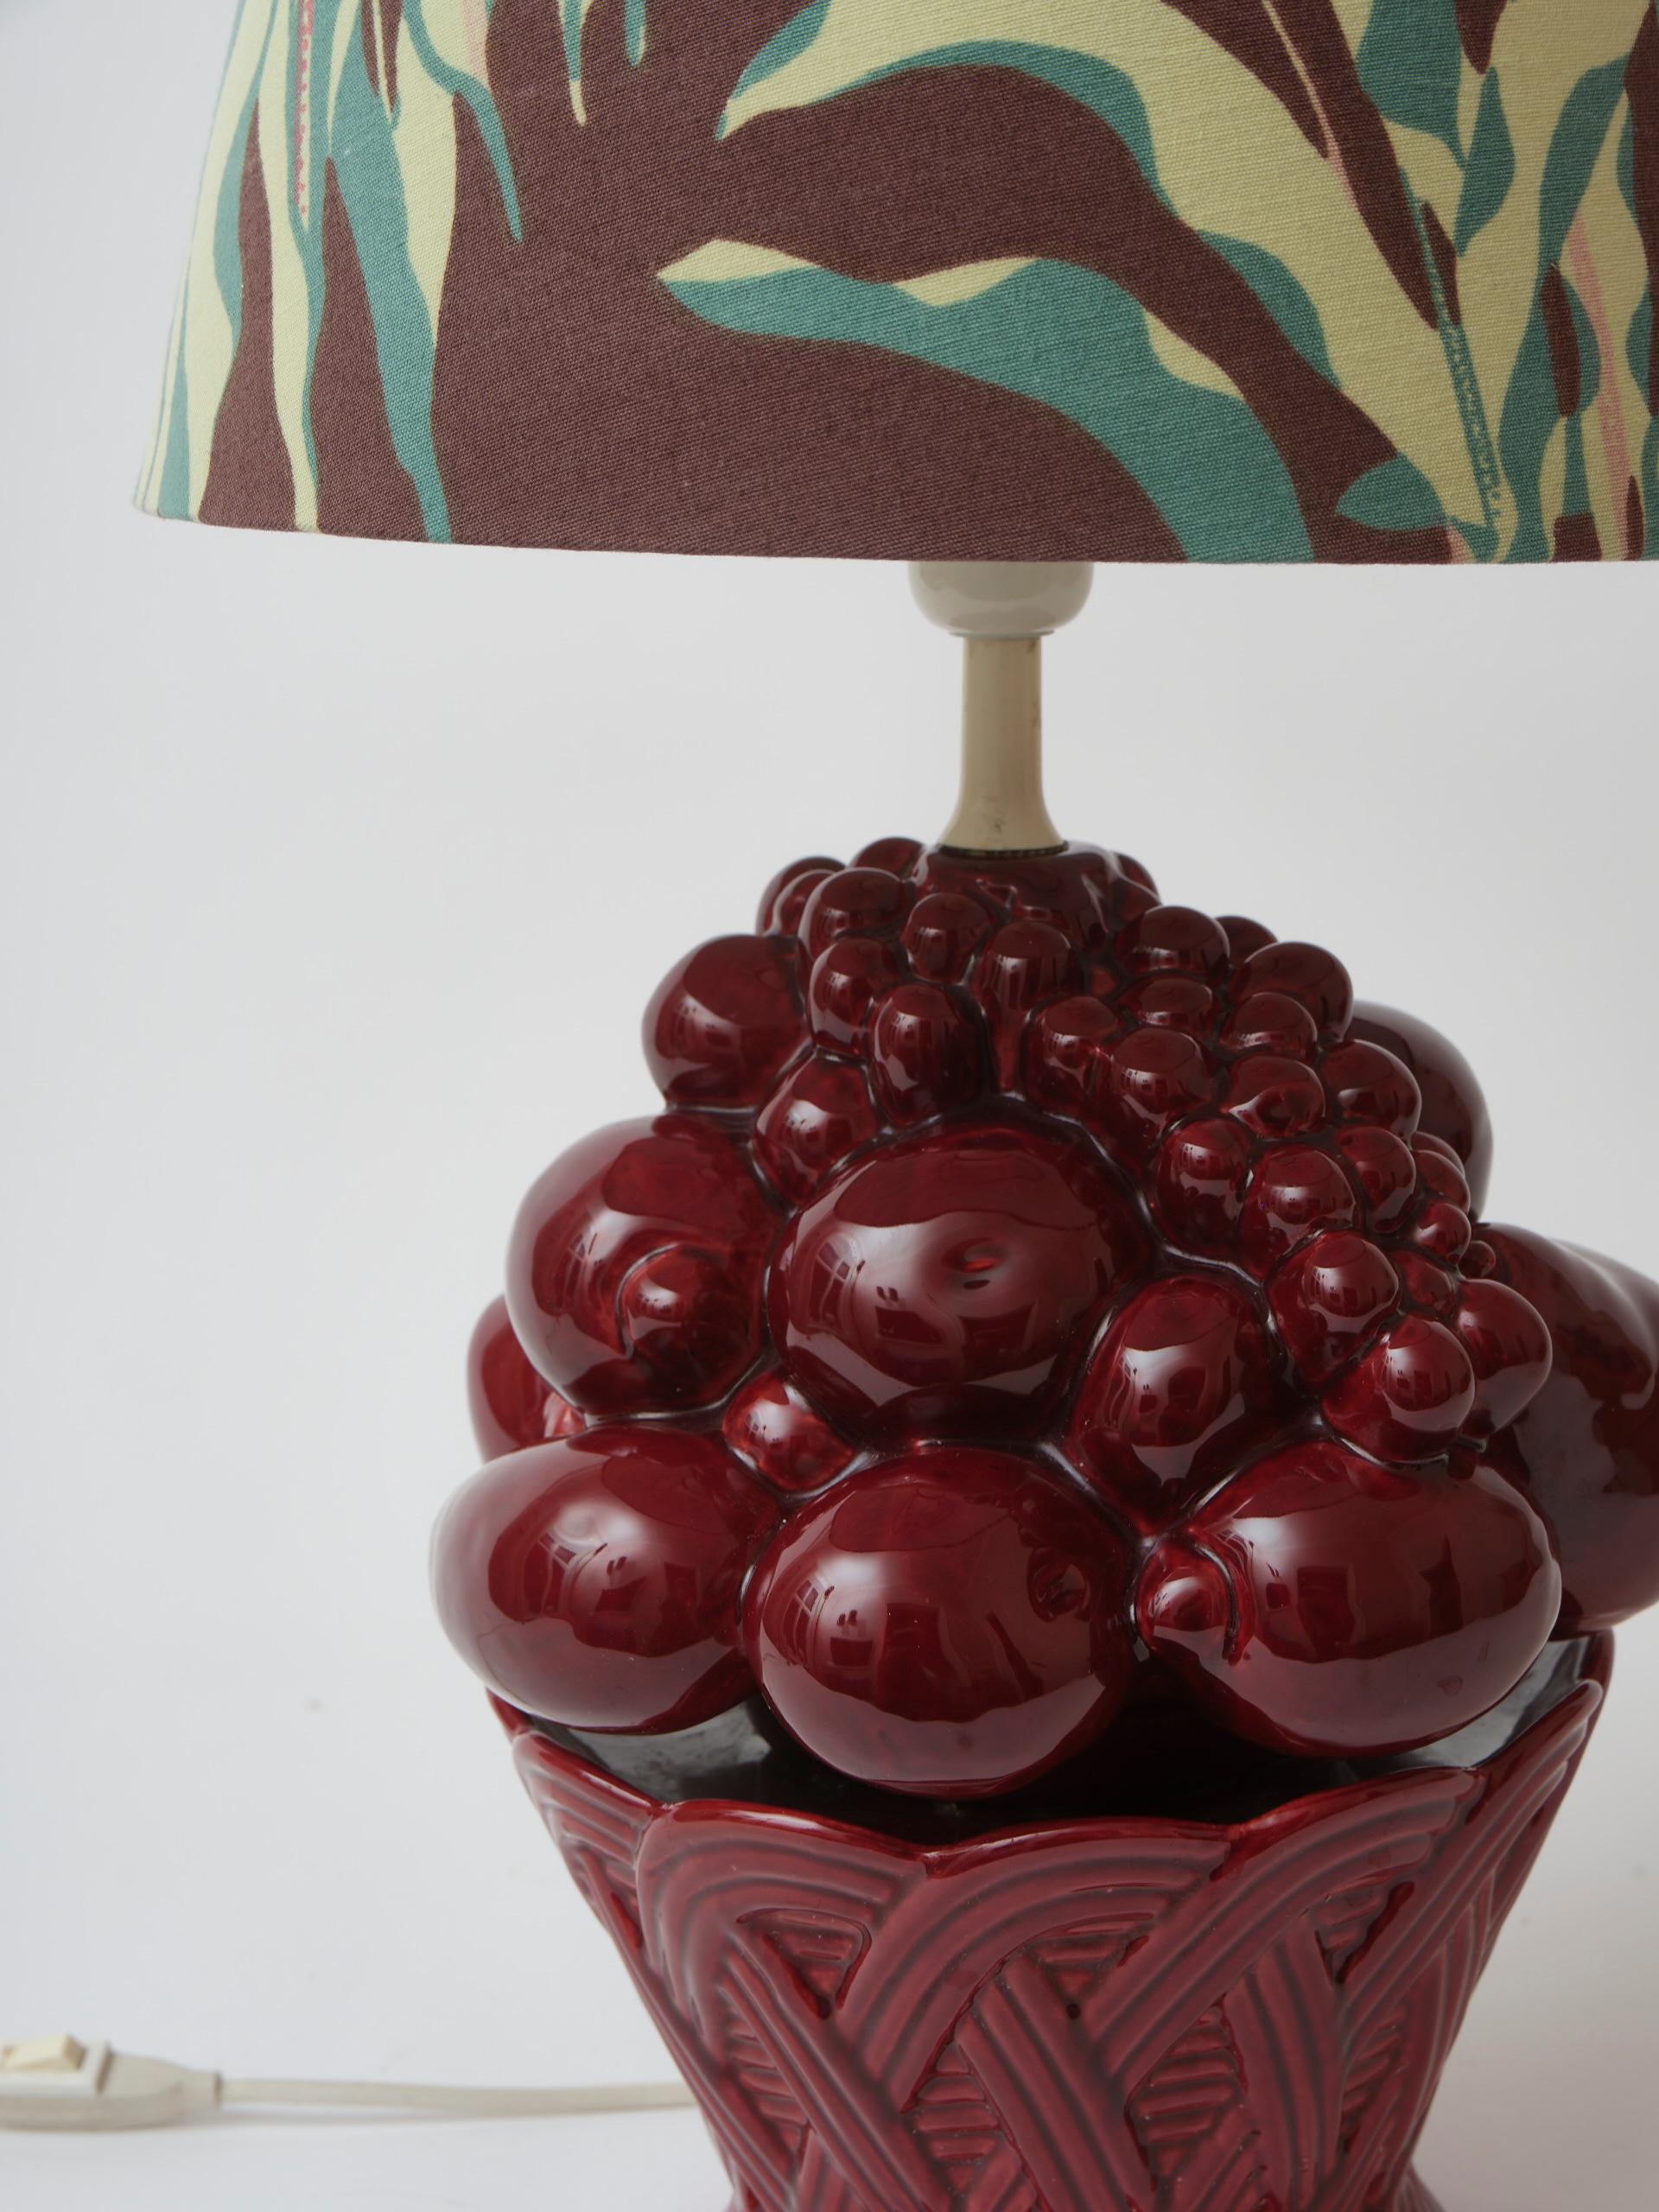 Swedish 1970s porcelain table lamp in the shape of a fruit bowl